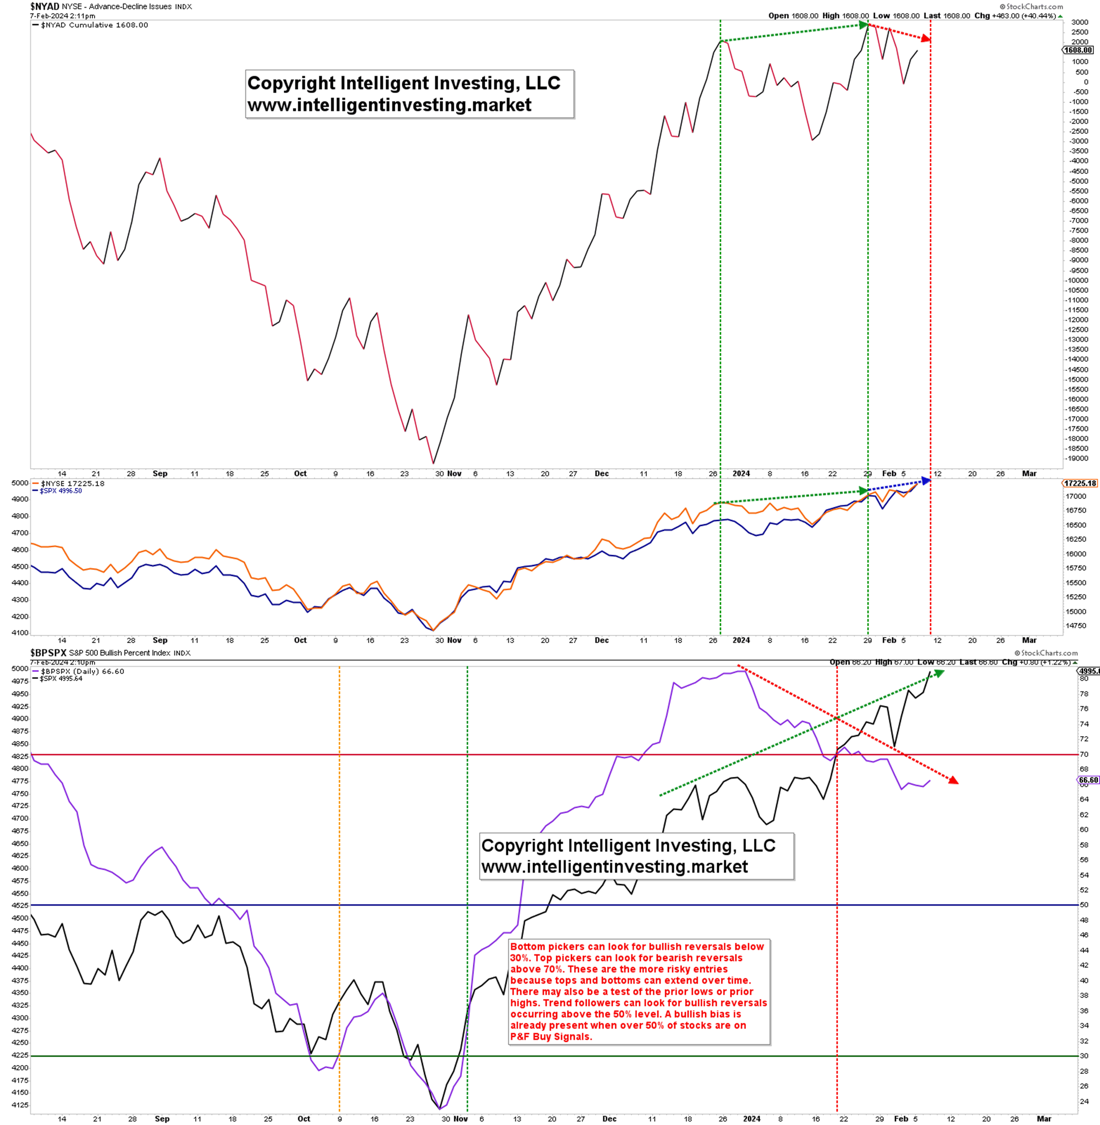 NYSE A/D line and the Bullish Percent Index for the S&P500